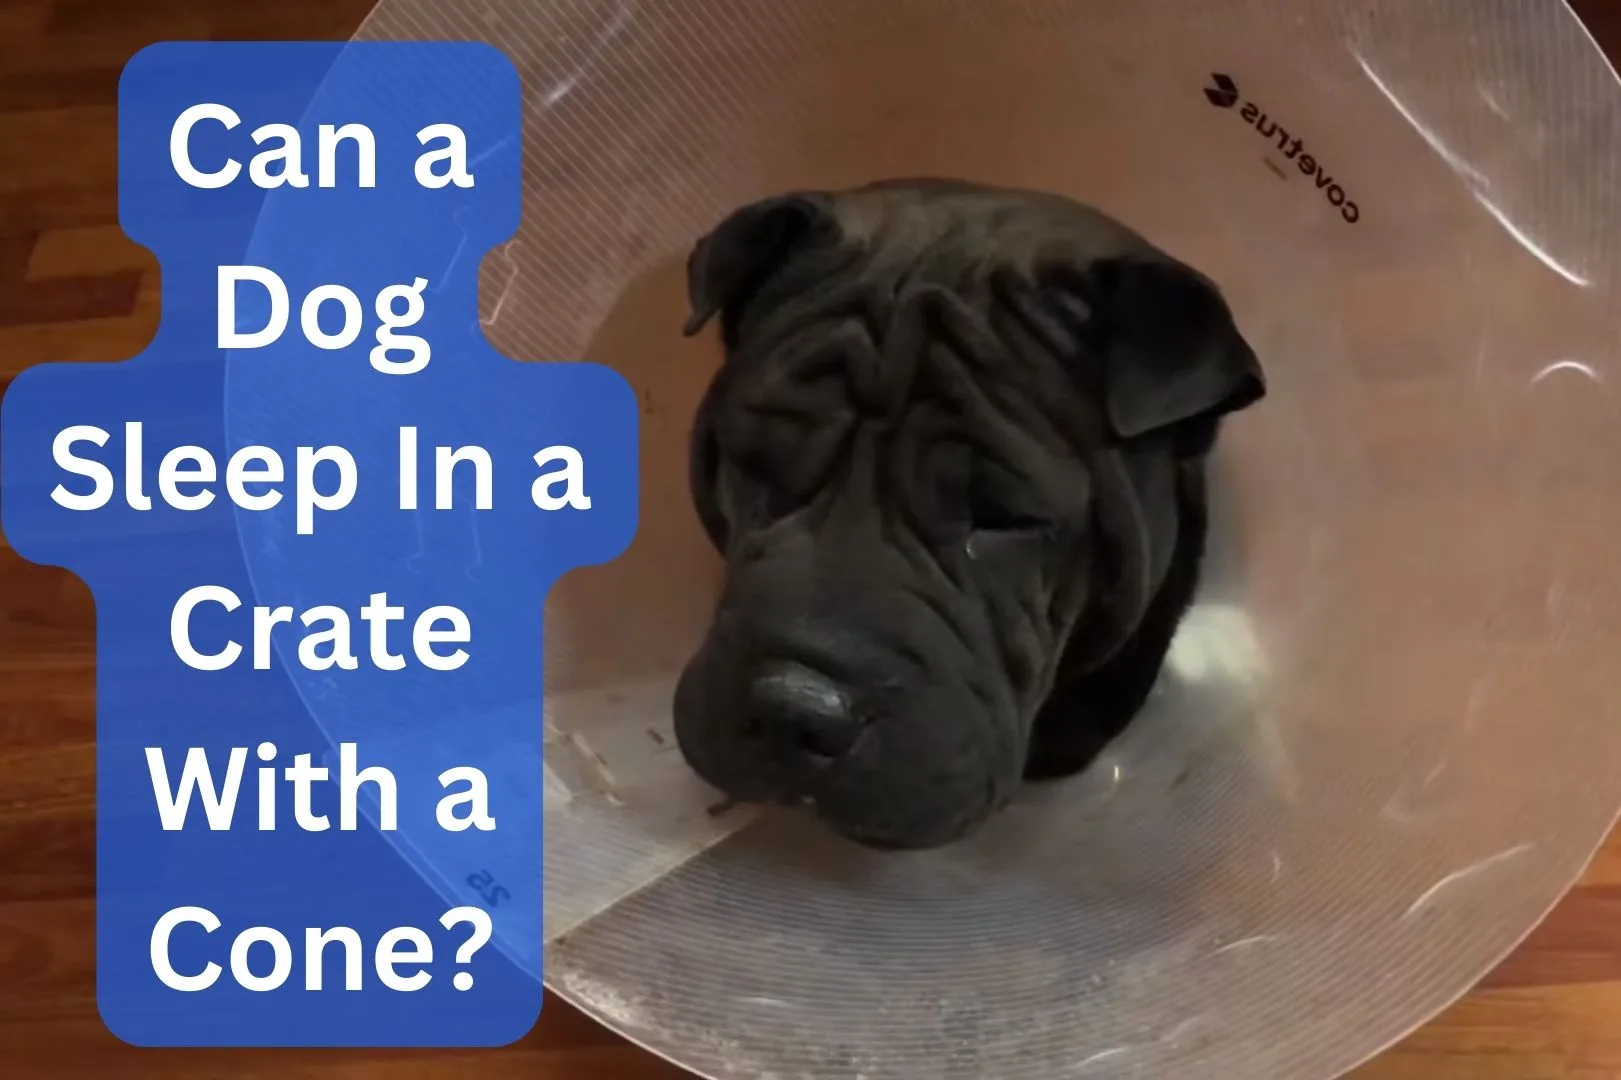 can a dog sleep in a crate with a cone